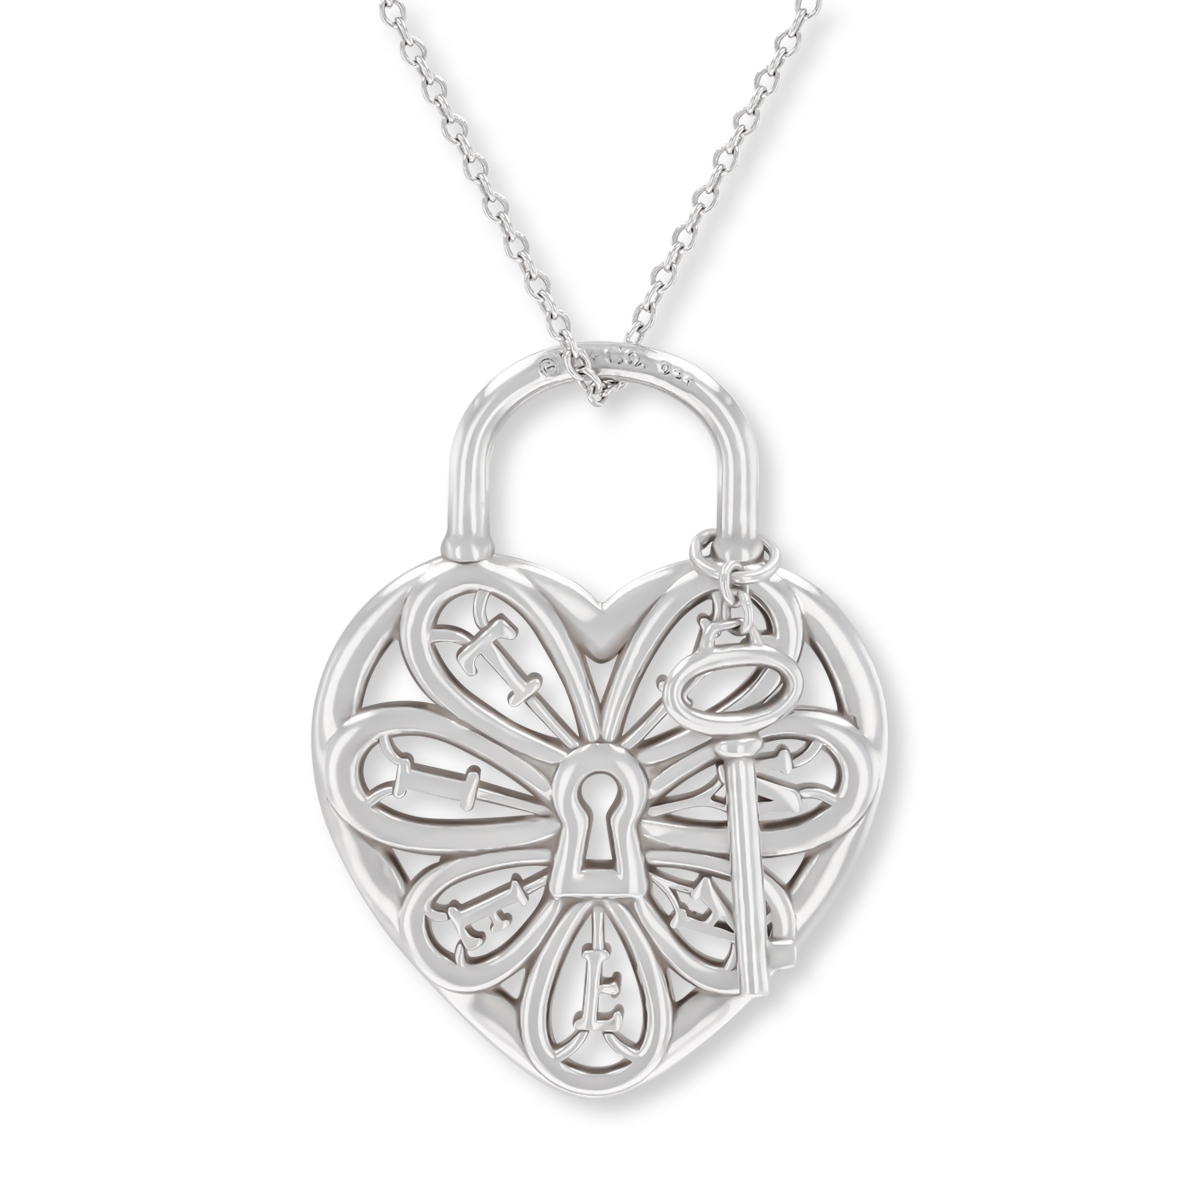 Tiffany & Co. Sterling Silver Filigree Heart With Key Pendant & Chain